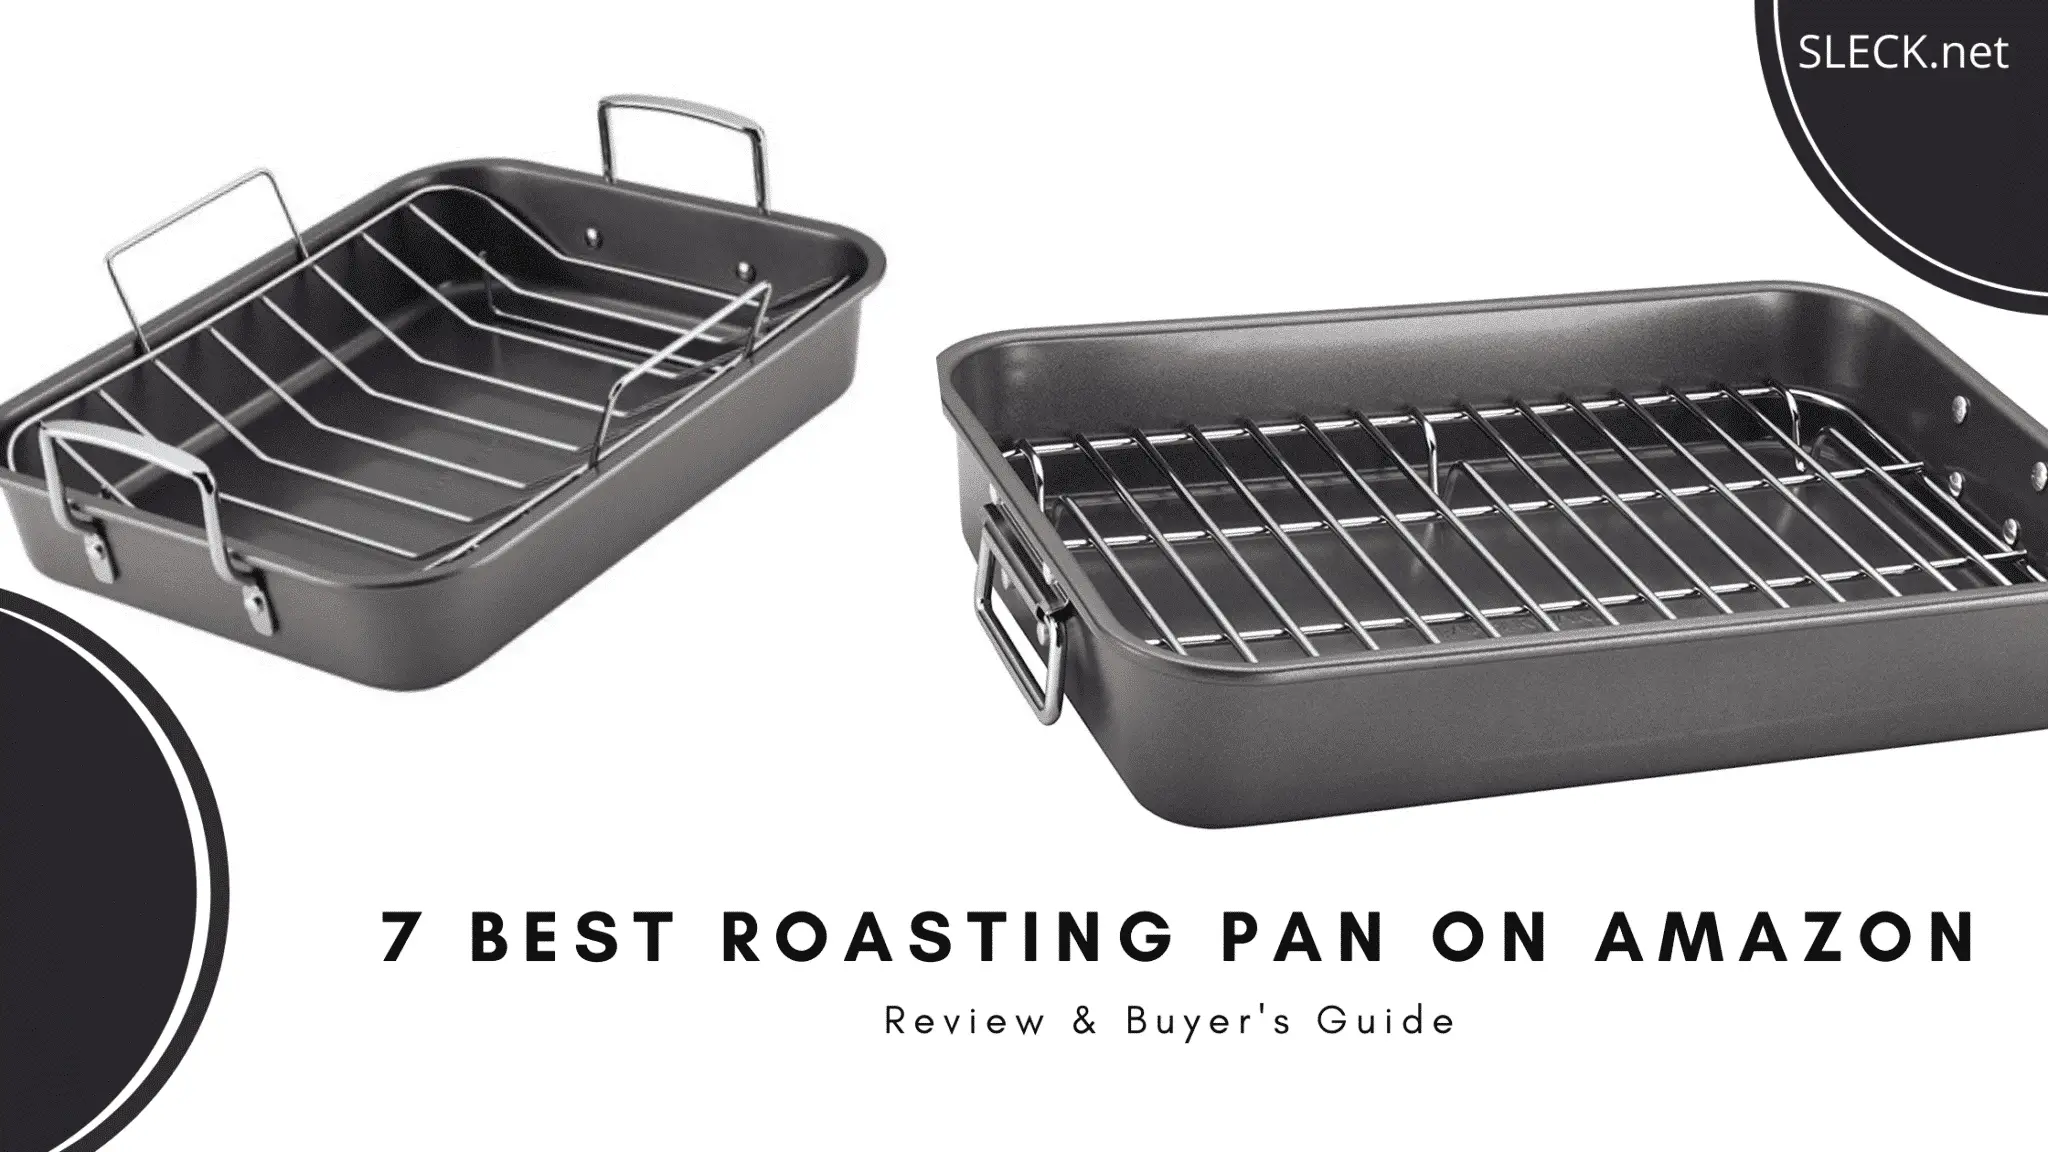 7 Best Roasting Pan on Amazon | Review & Buyer’s Guide